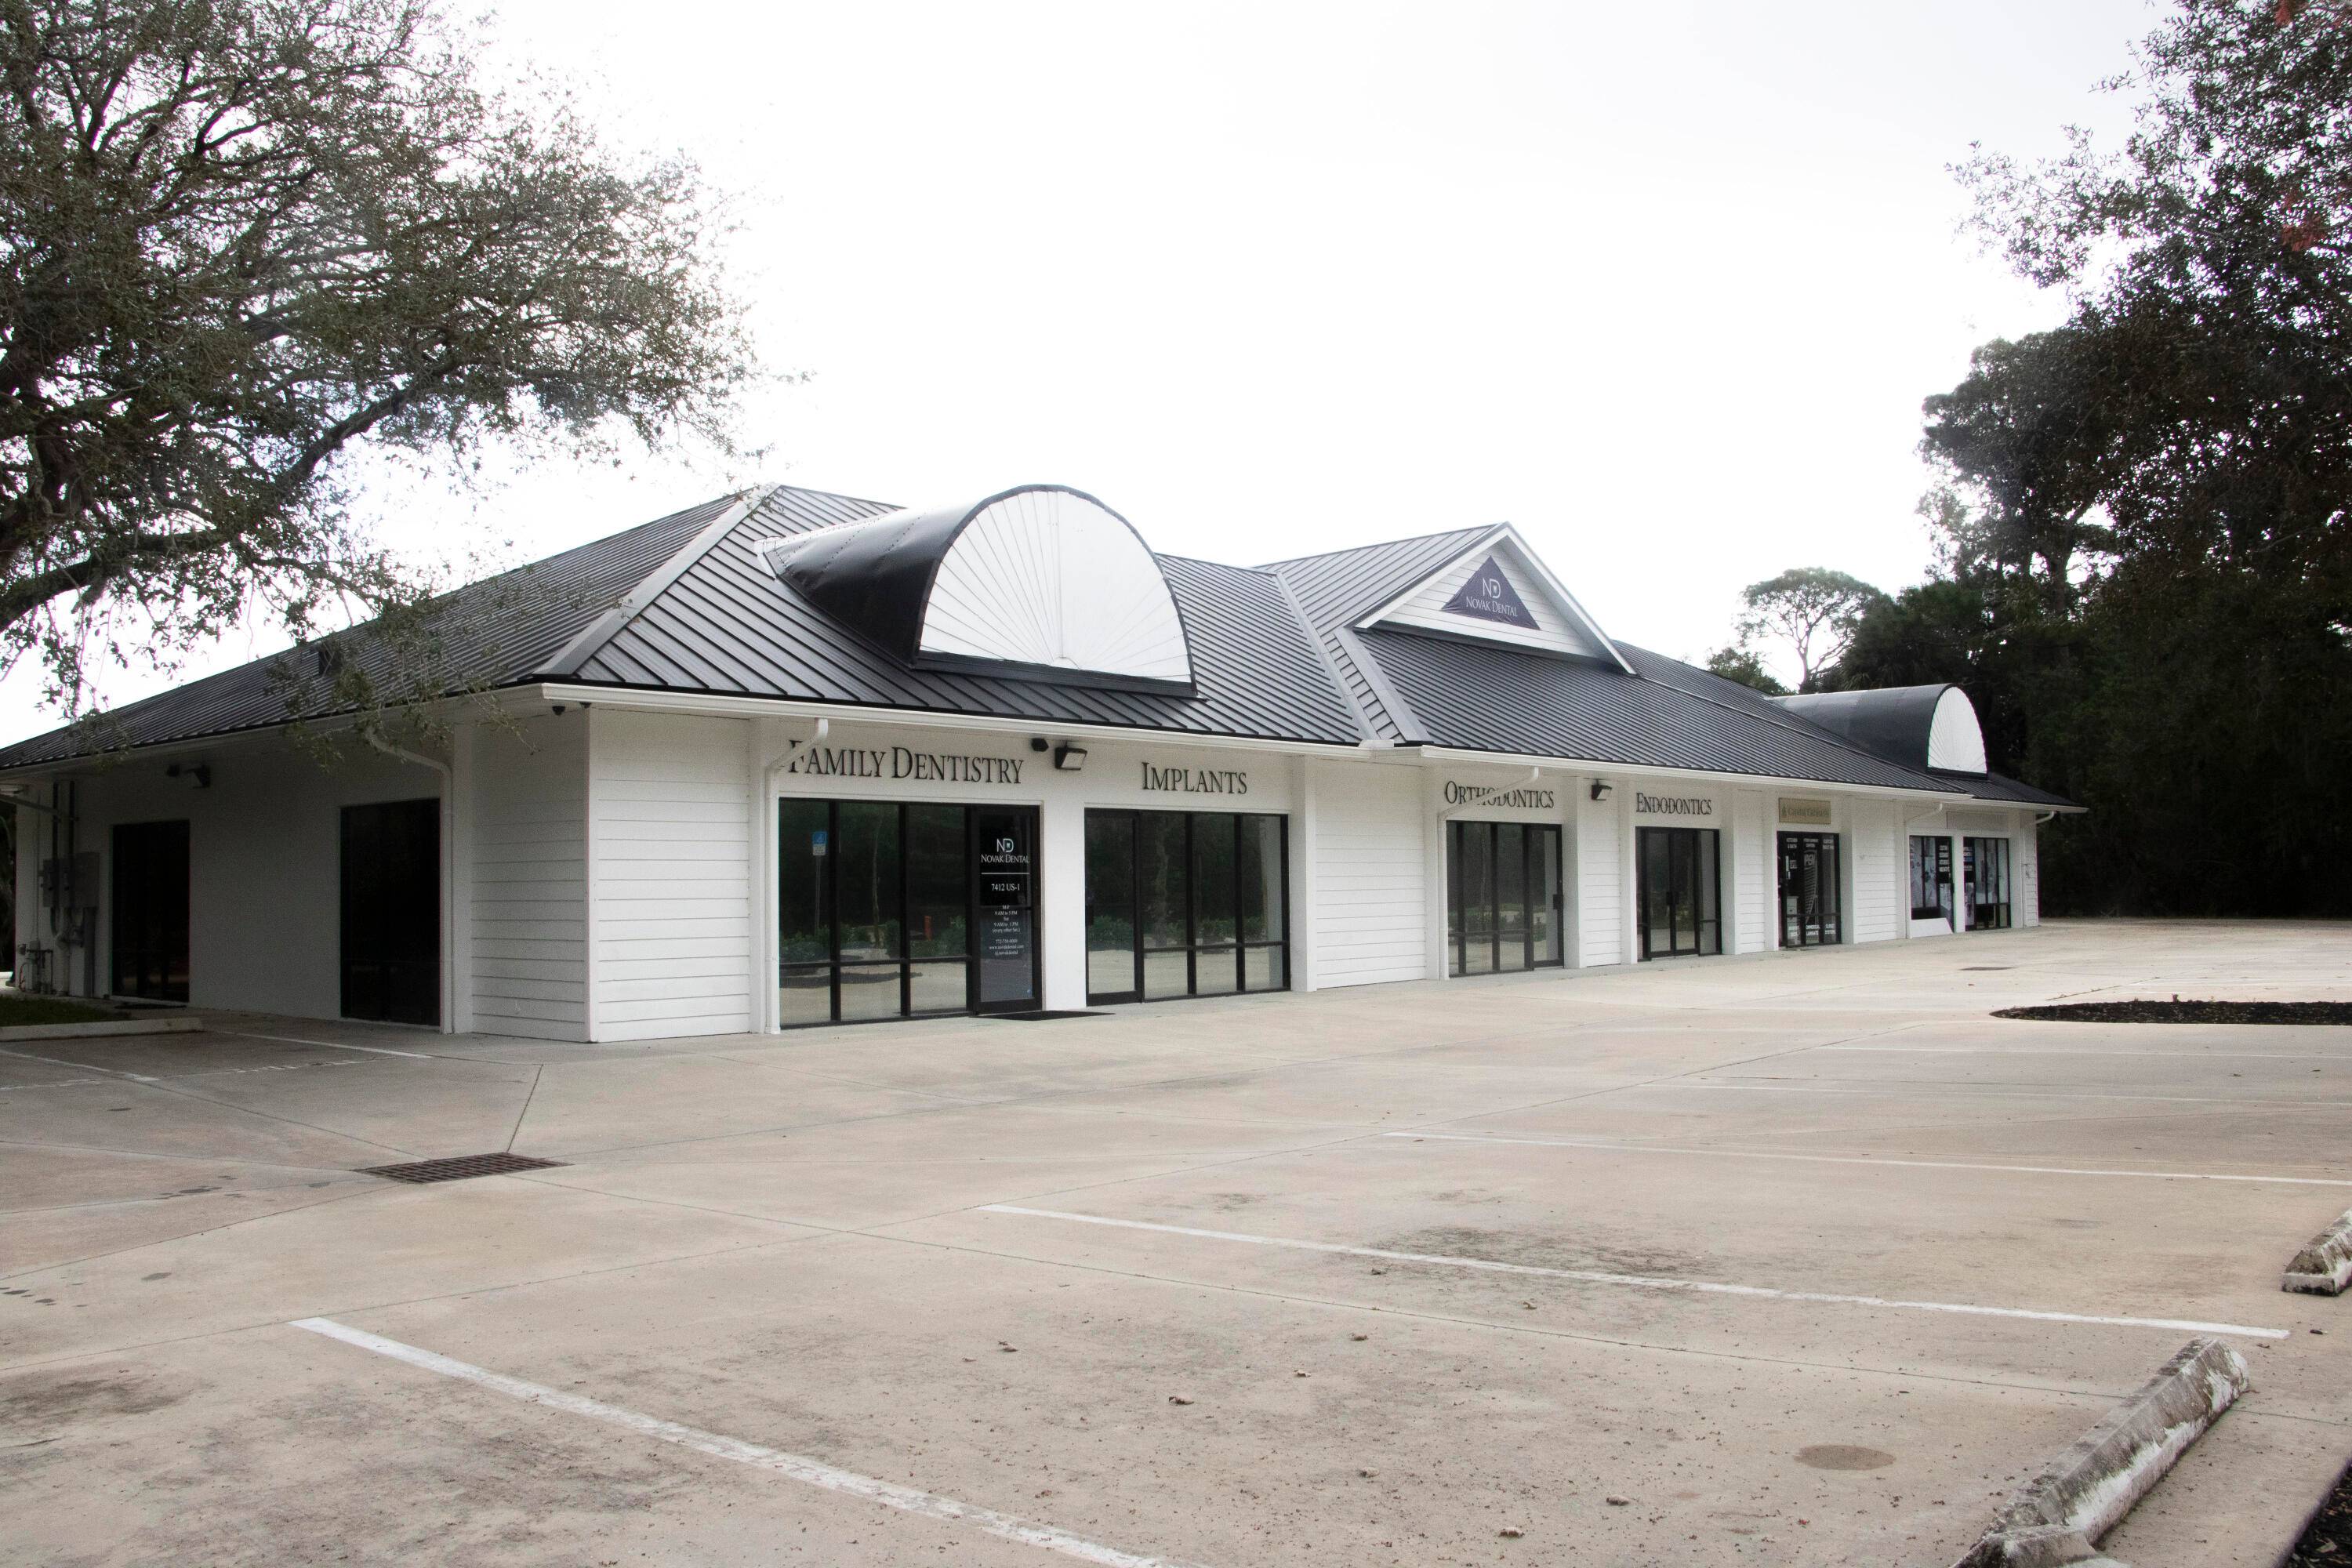 33 parking spacesAvailable 9 1 2024Lease includes monument signageFunctional medical office floorplanWalk up entrance from parking lotLocated on property with 240 ft of frontage on US 1Traffic of over 28, ...